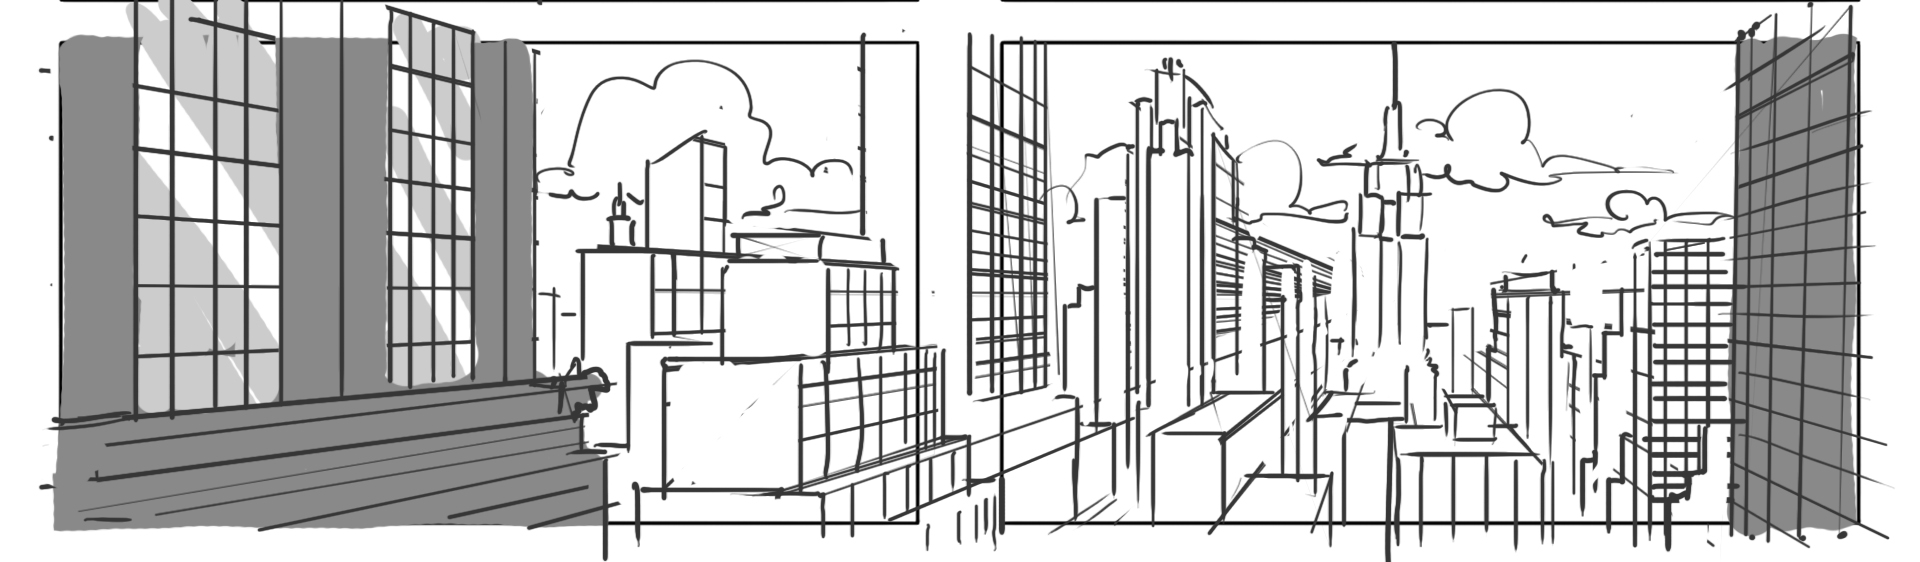 Line drawing of a city scape from the view of a skyscraper window